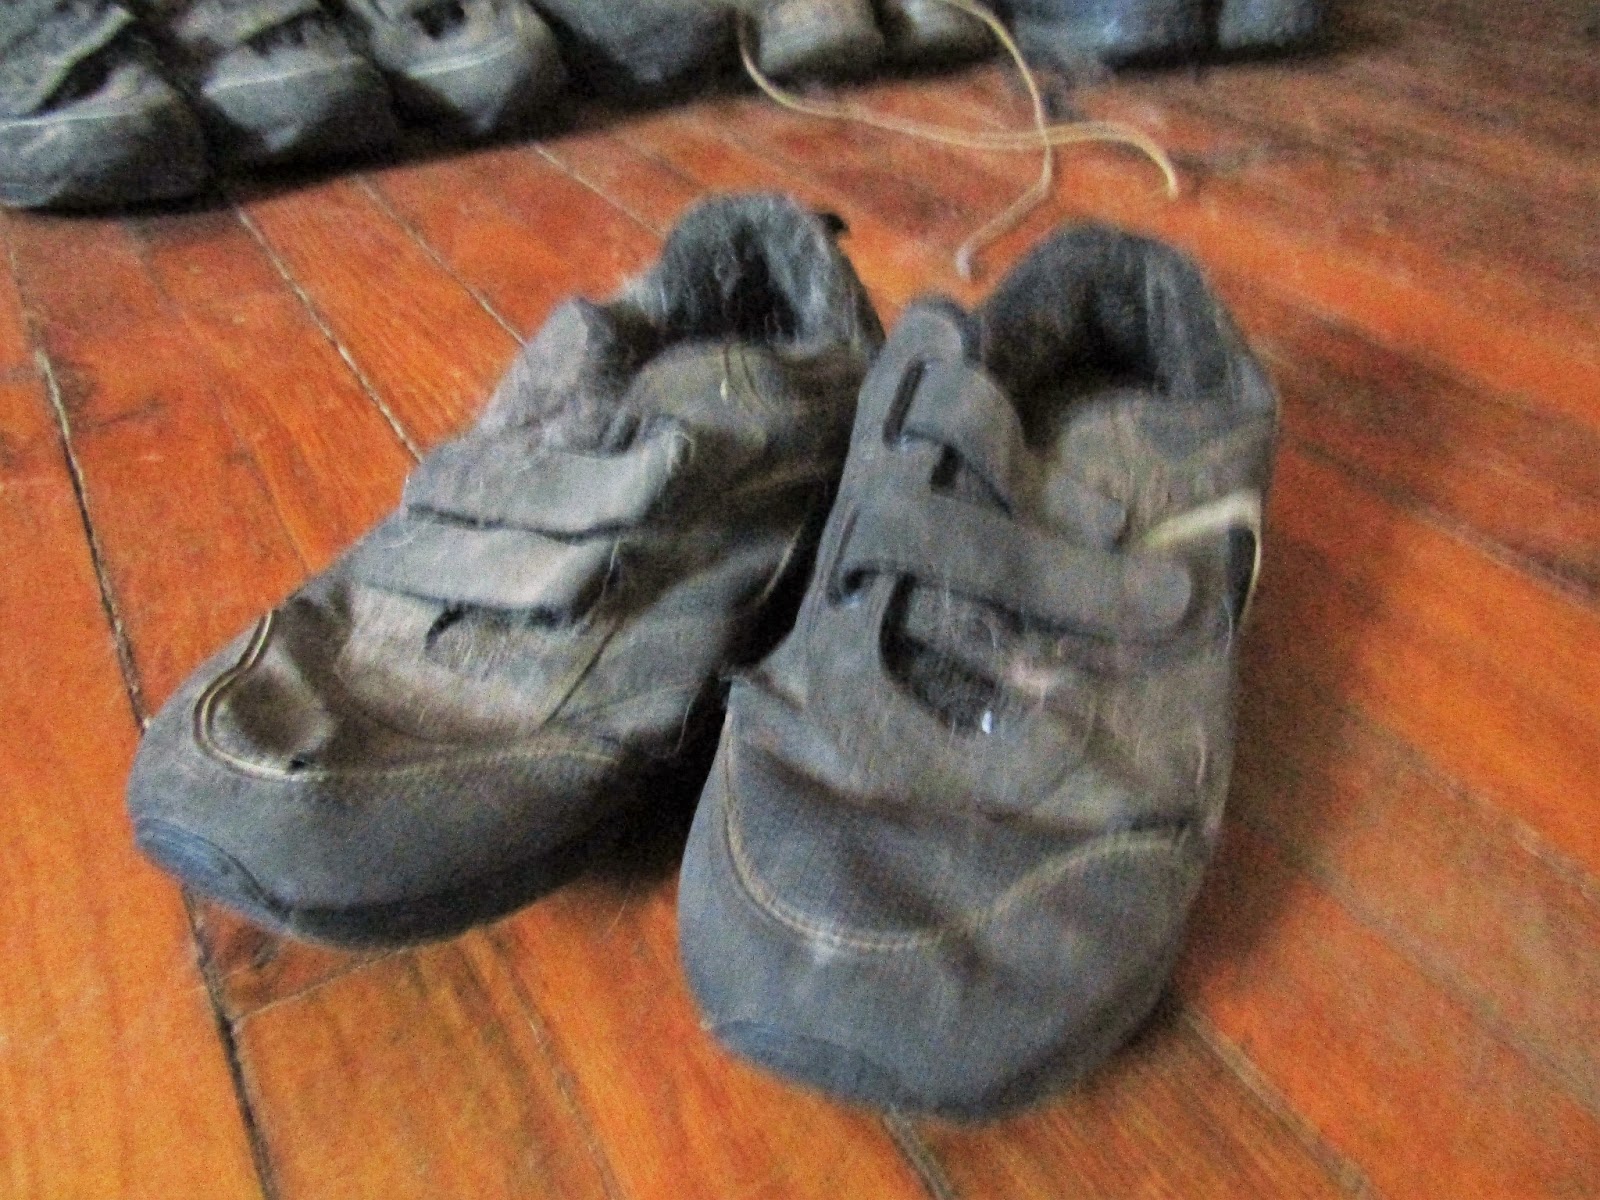 REFRESHINGLY OLD: SHOES